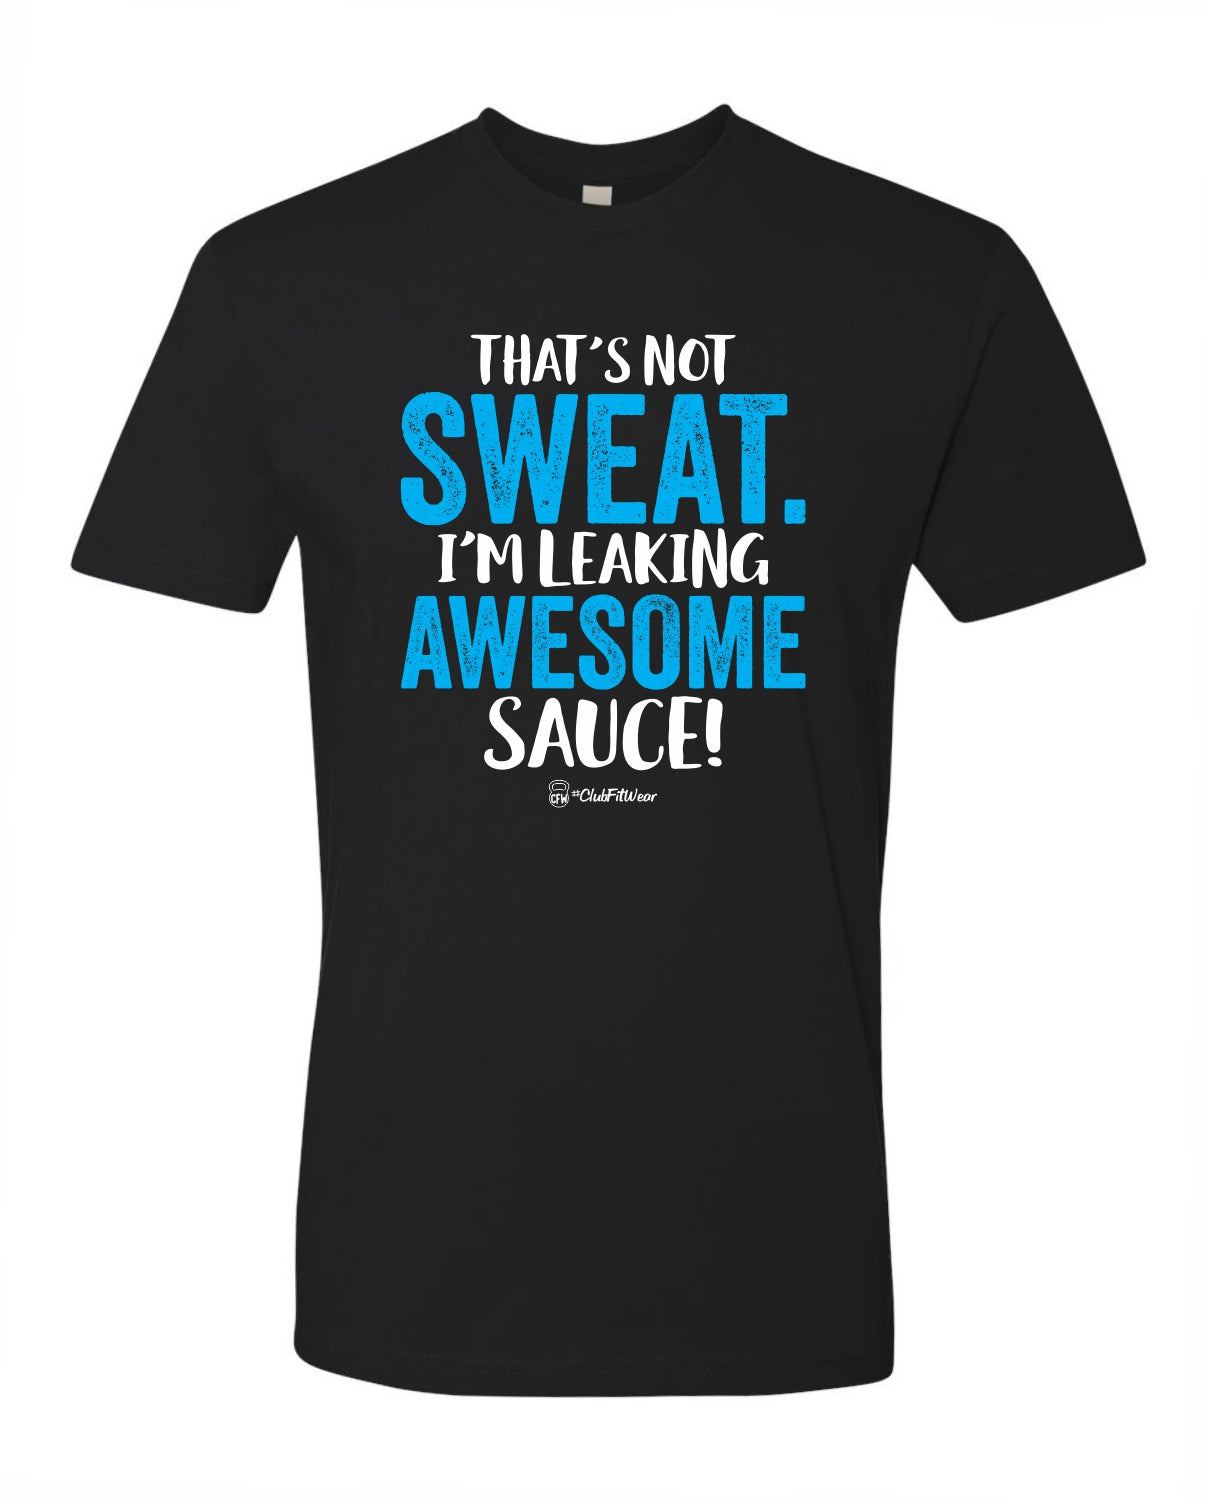 That's Not Sweat. I'm Leaking Awesome Sauce!